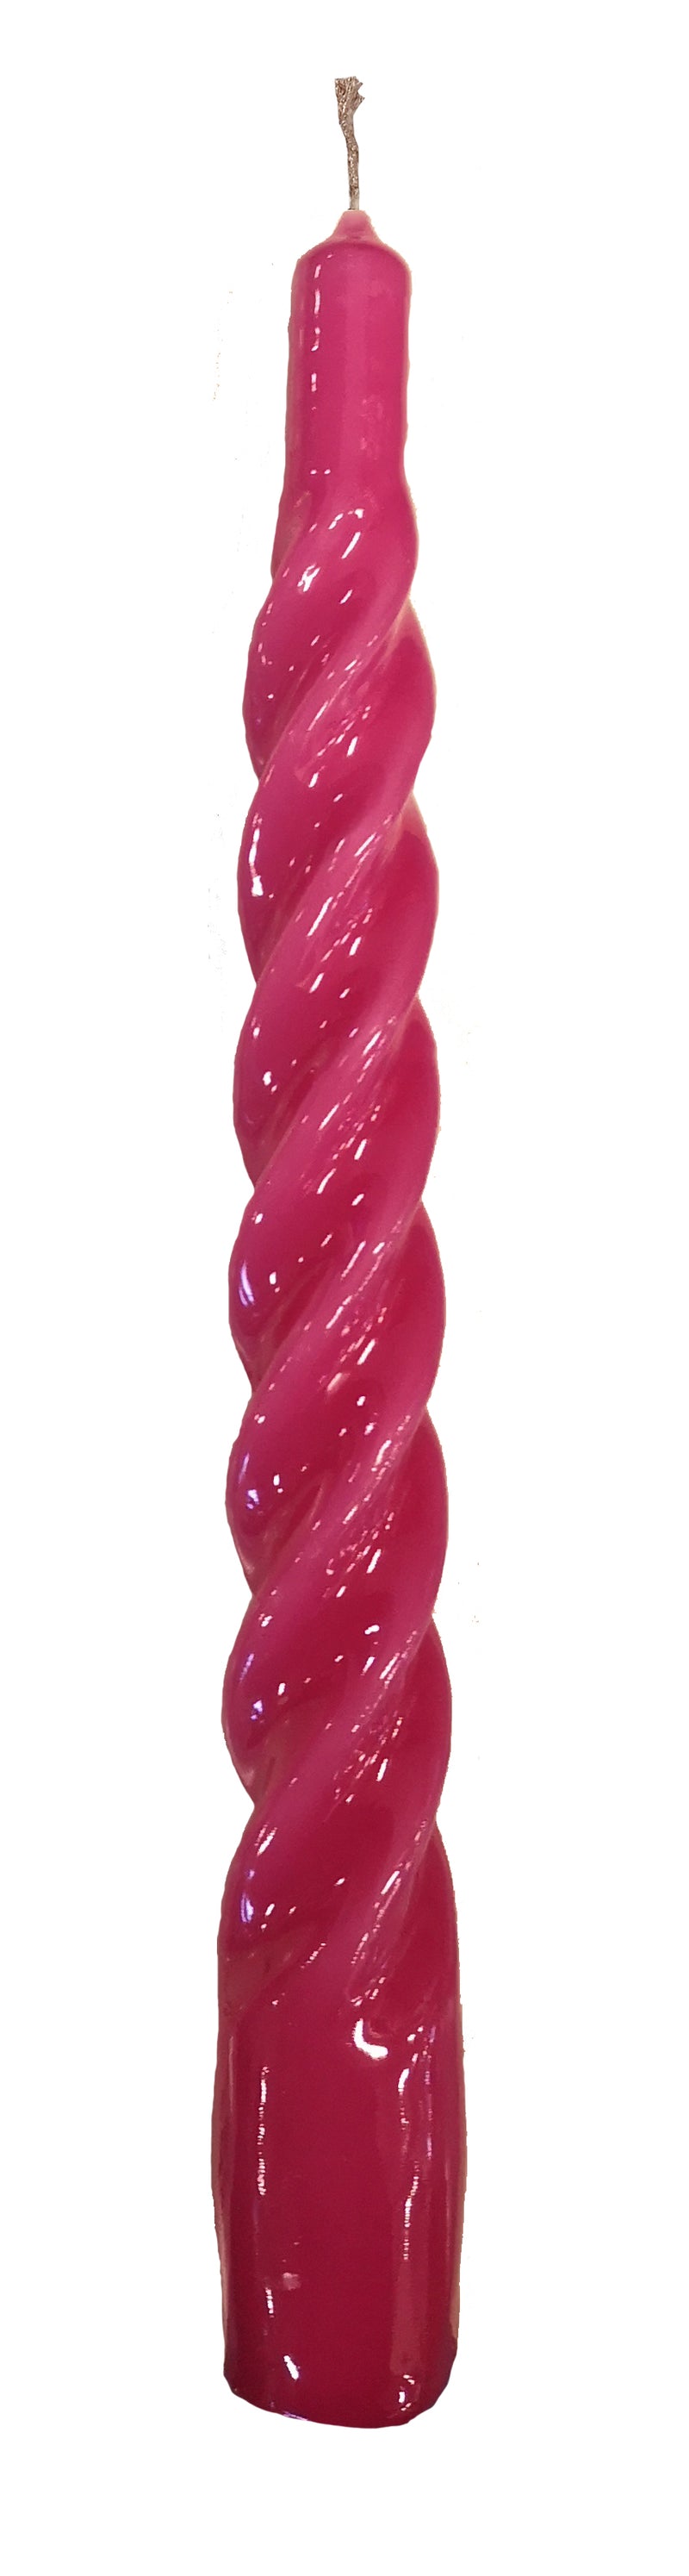 Twisted Candle raspberry